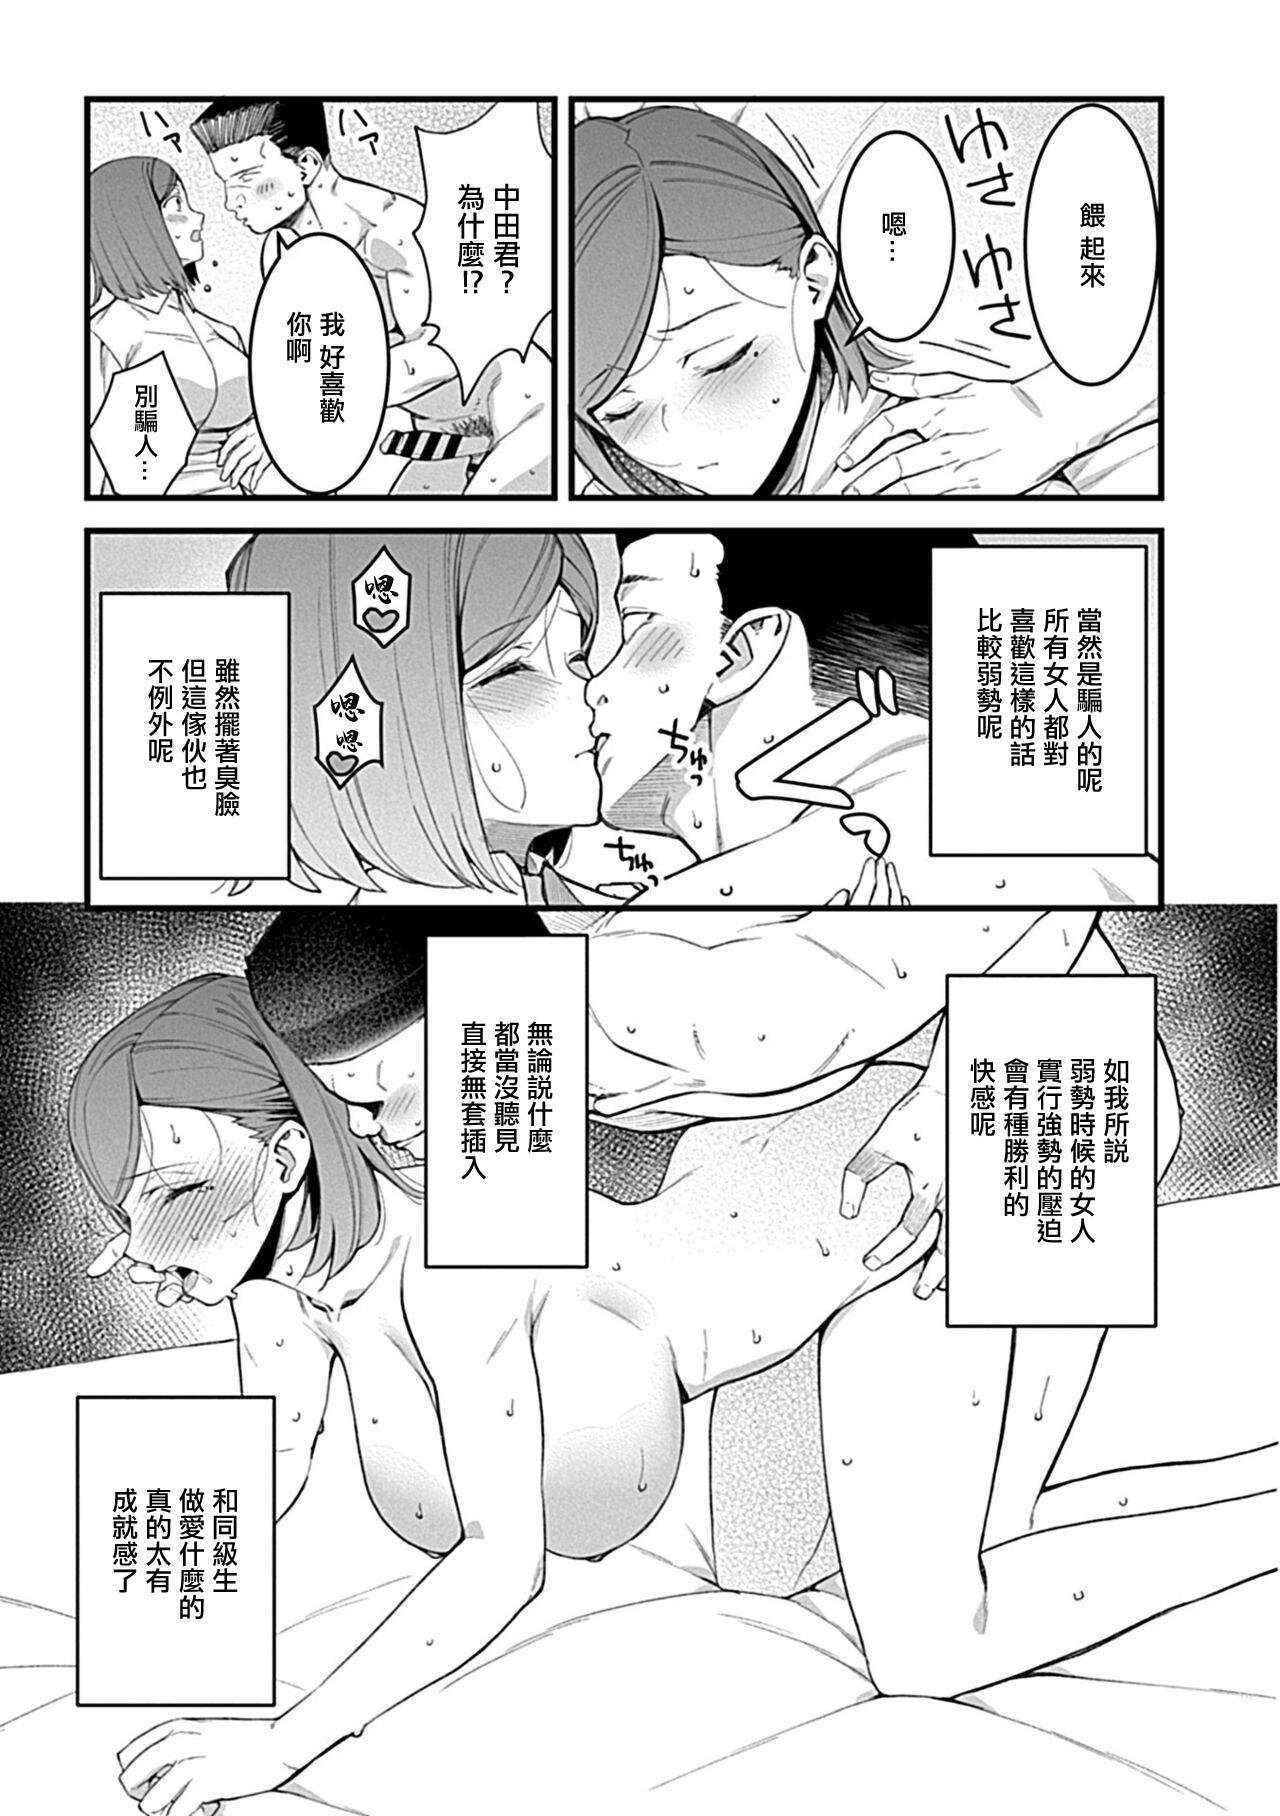 Girls Getting Fucked 同窓会〜初恋の女性は雌堕ち済み〜 Pussy Lick - Page 10